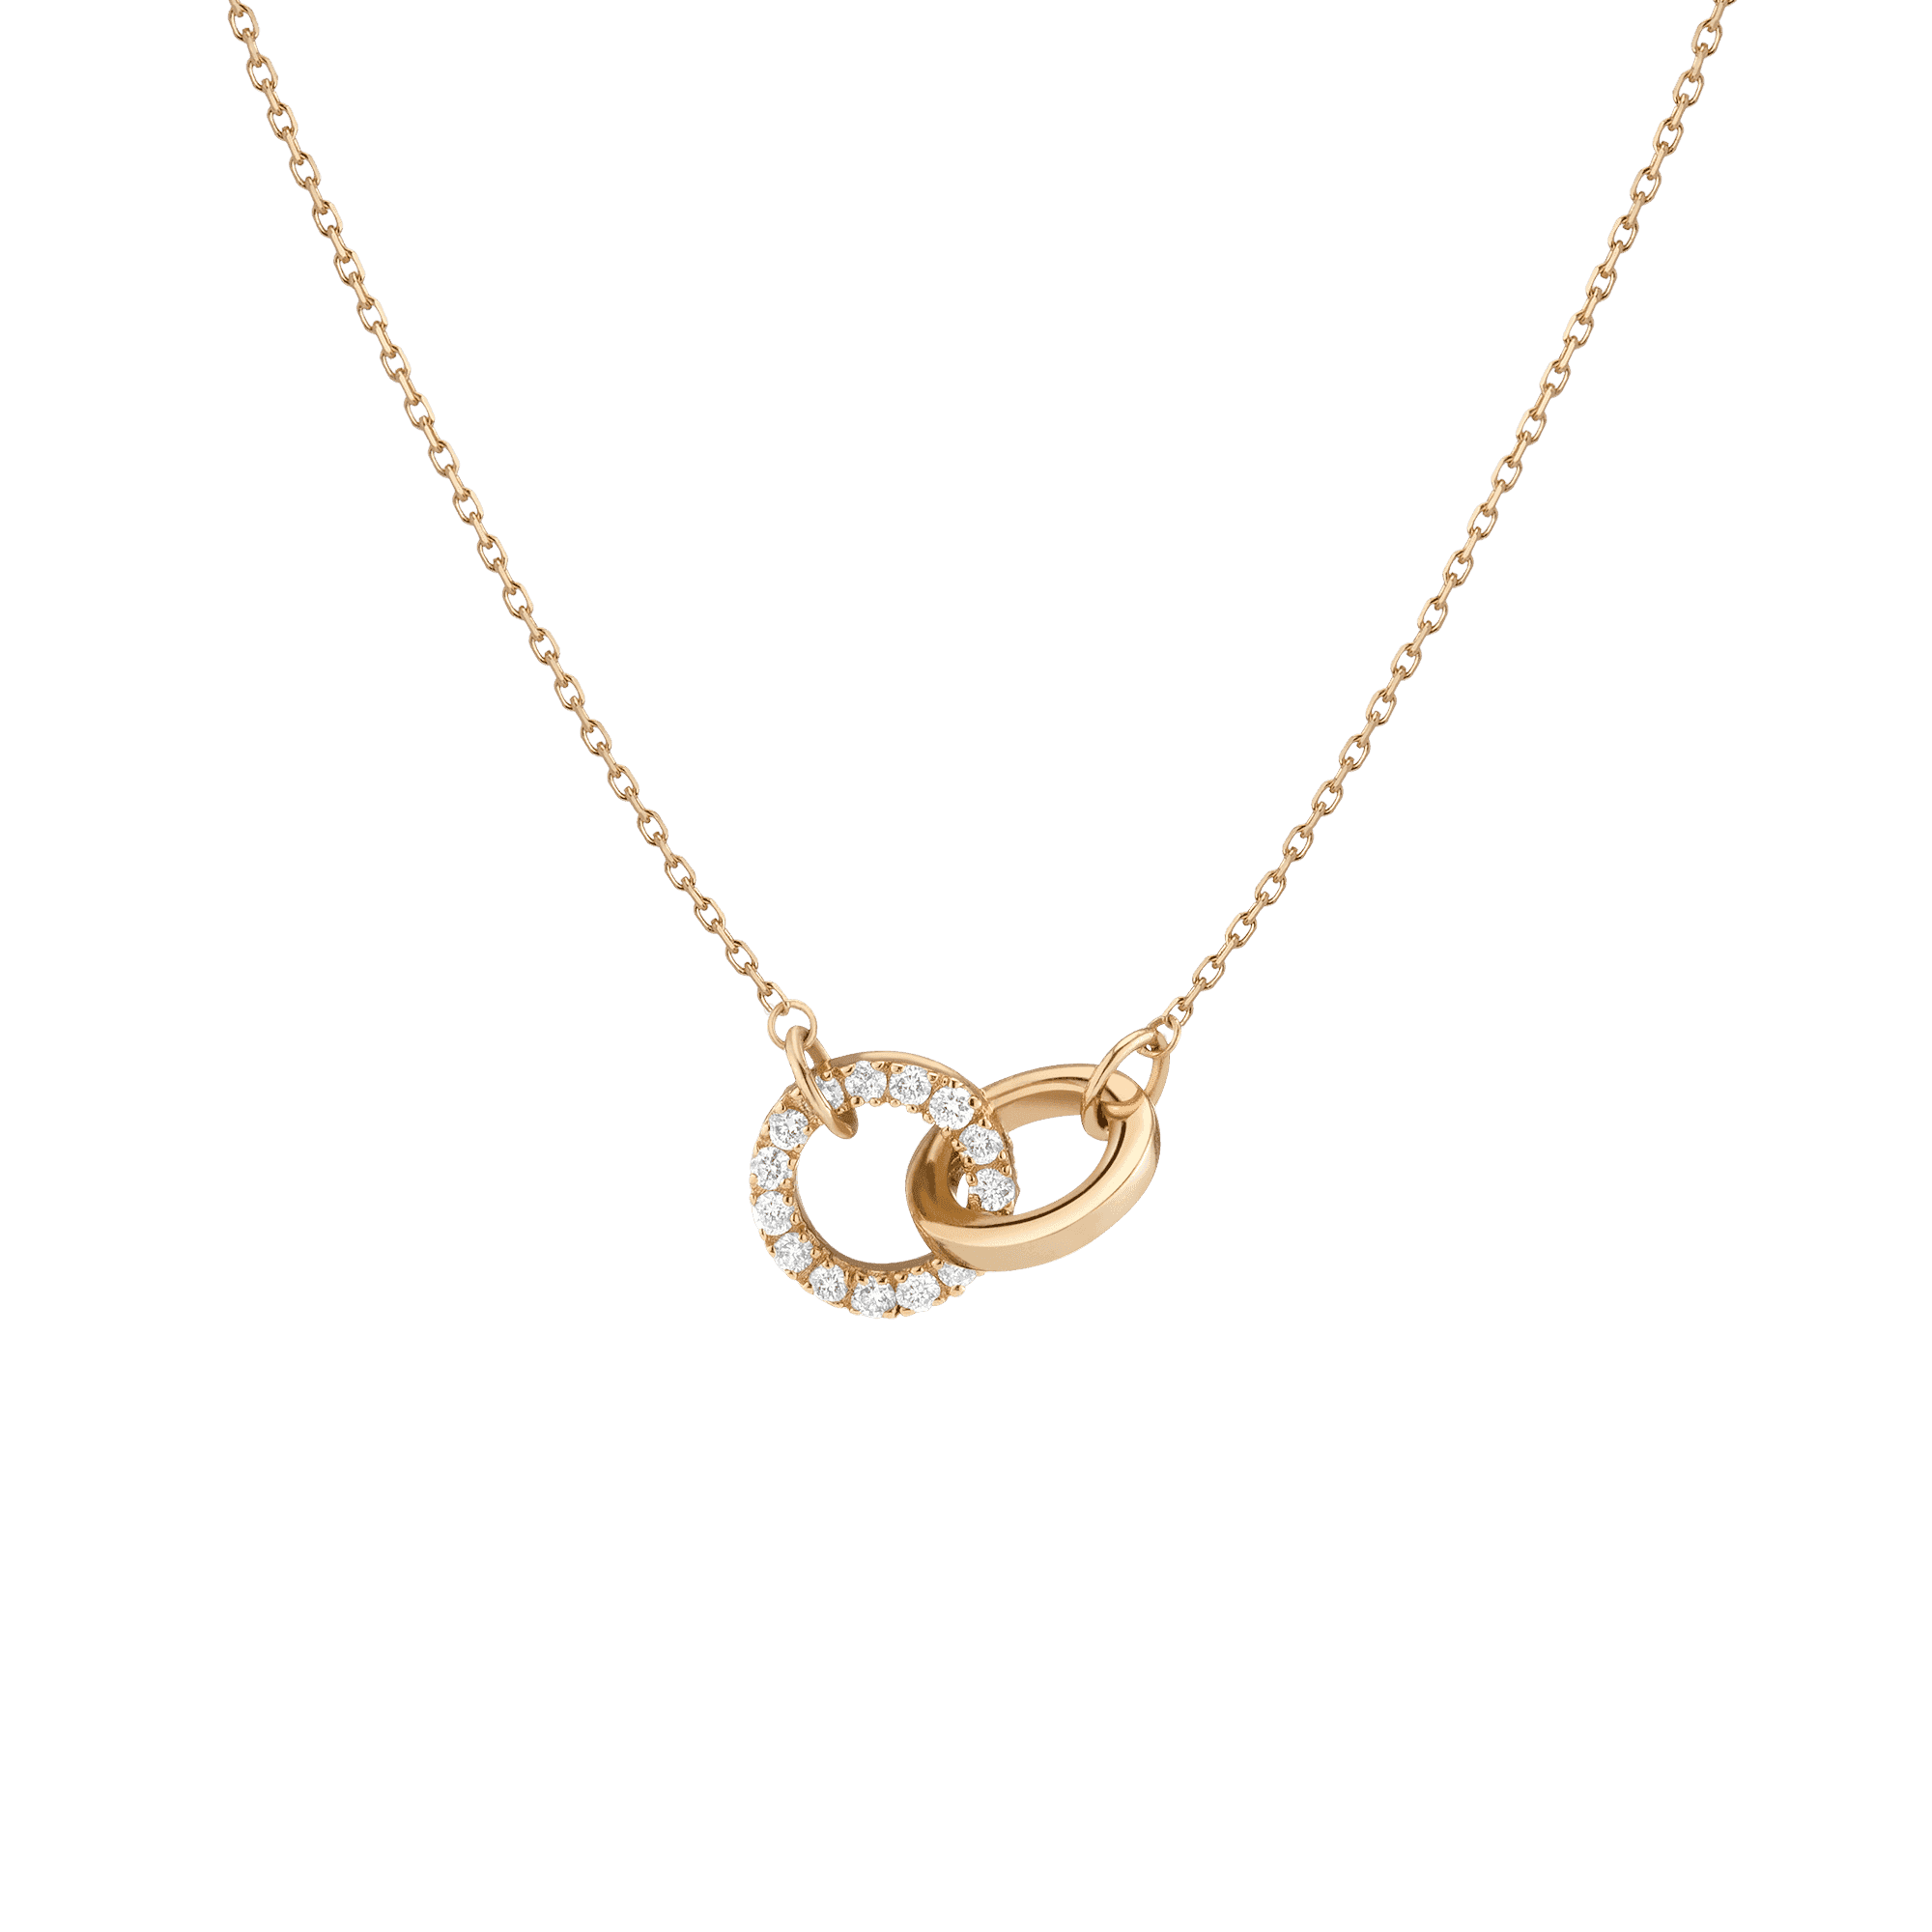 Aurate New York Diamond Connection Necklace, 14K Yellow Gold